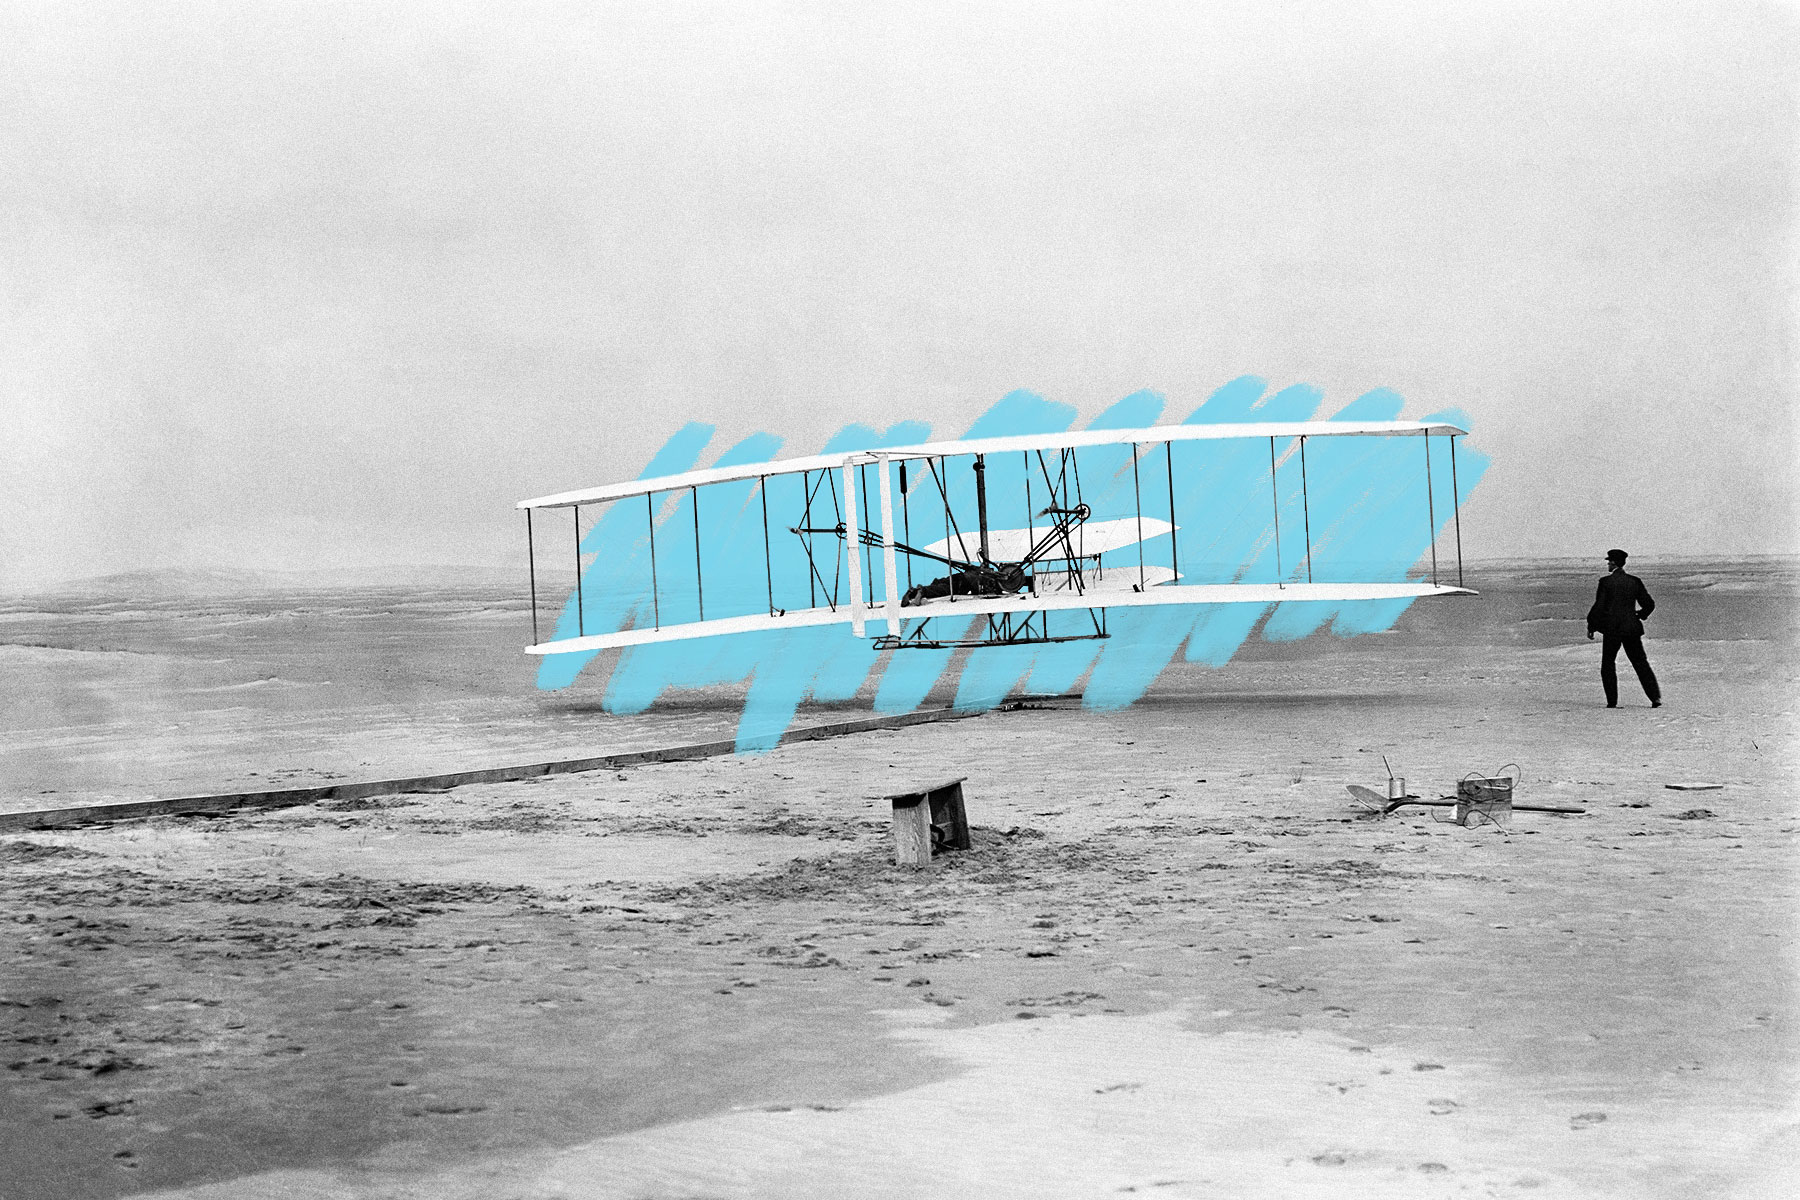 Wright Flyer, 1903